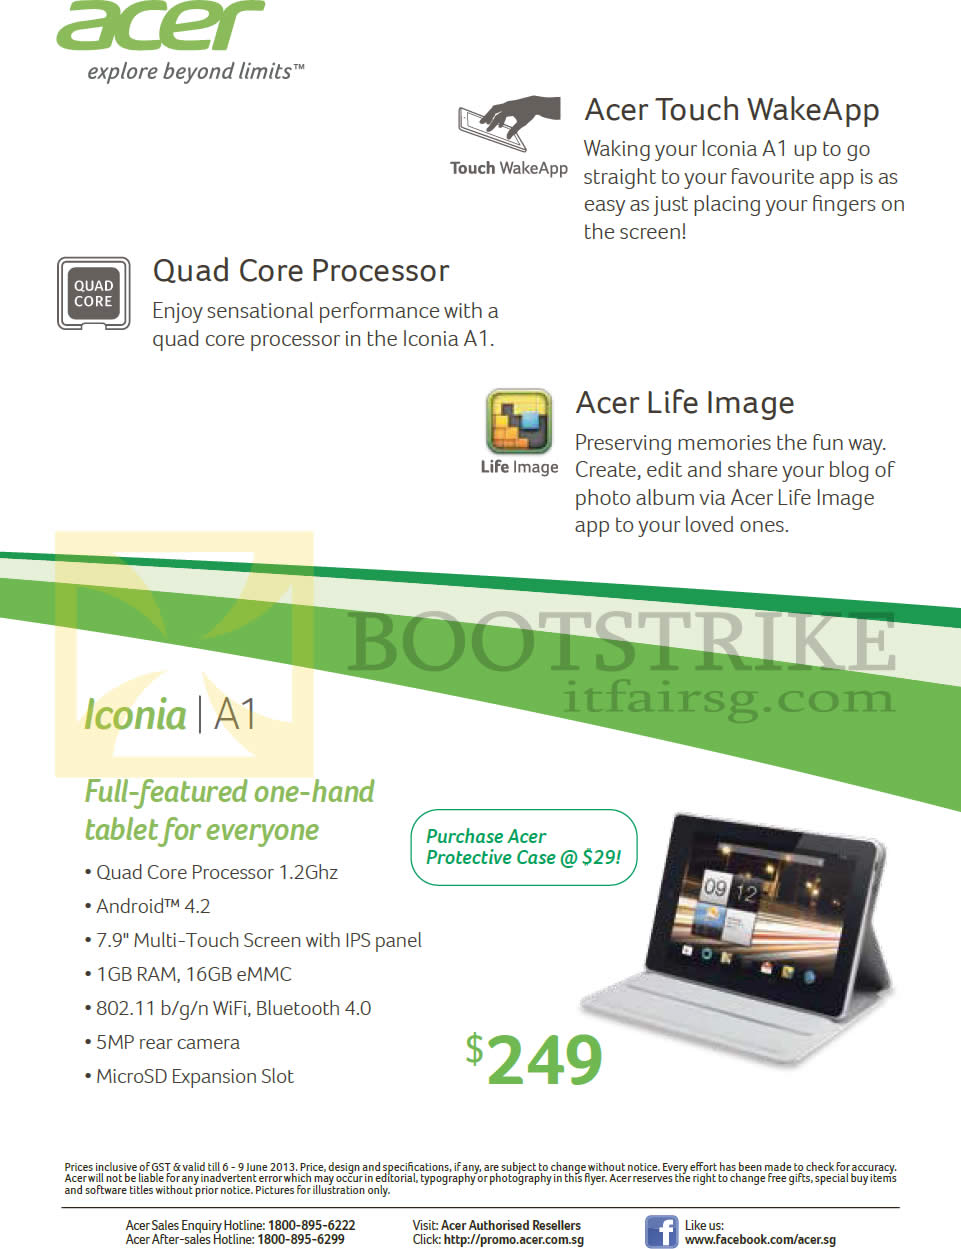 PC SHOW 2013 price list image brochure of Acer Tablet Iconia A1 Features